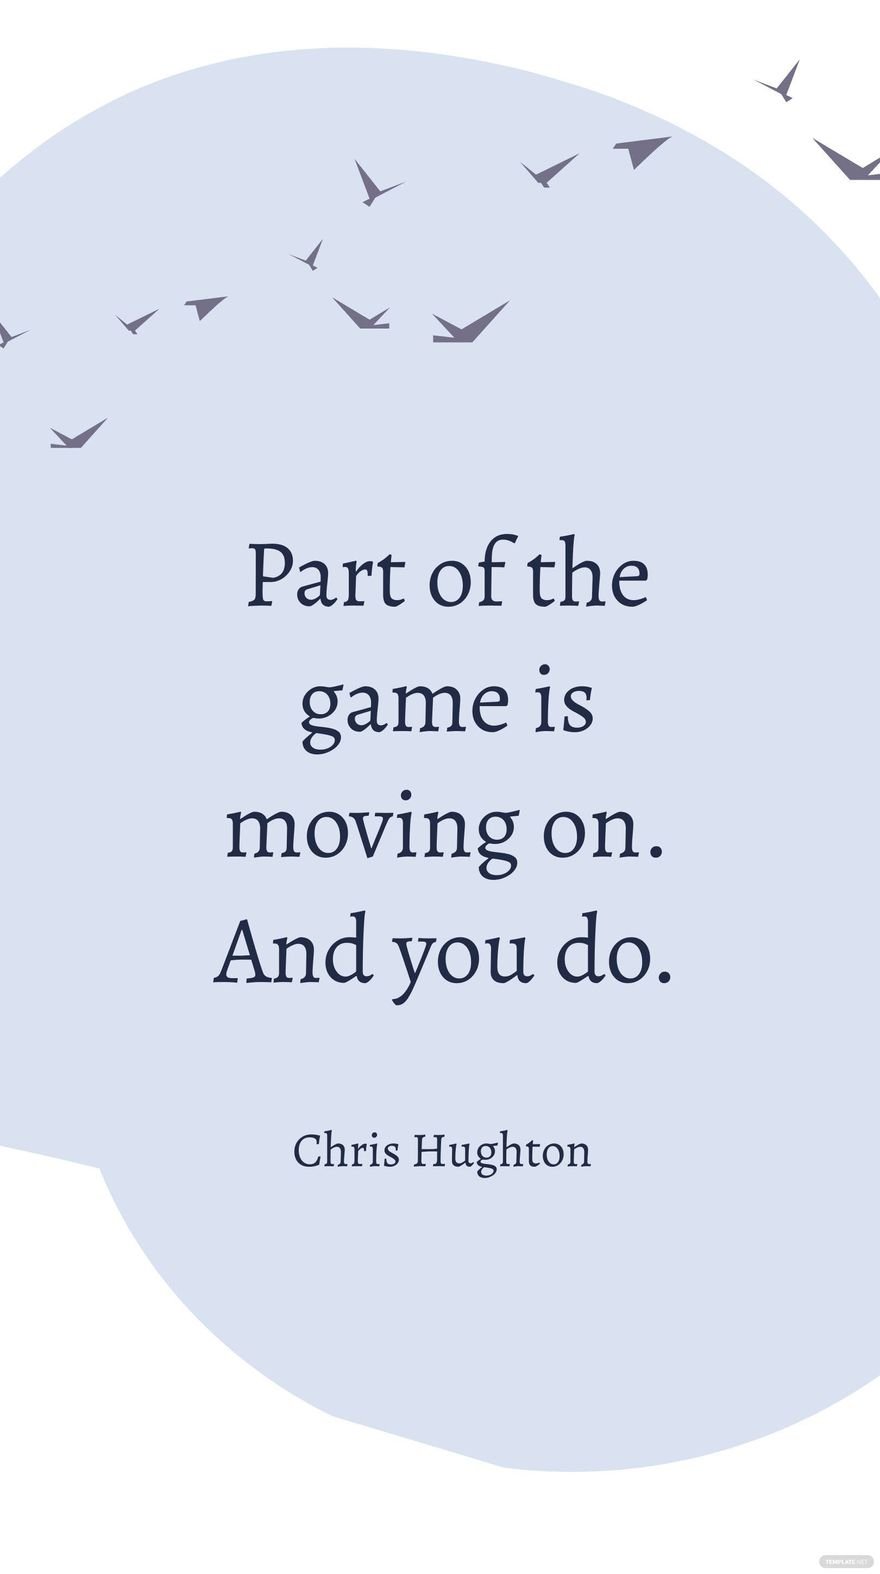 Chris Hughton - Part of the game is moving on. And you do. in JPG